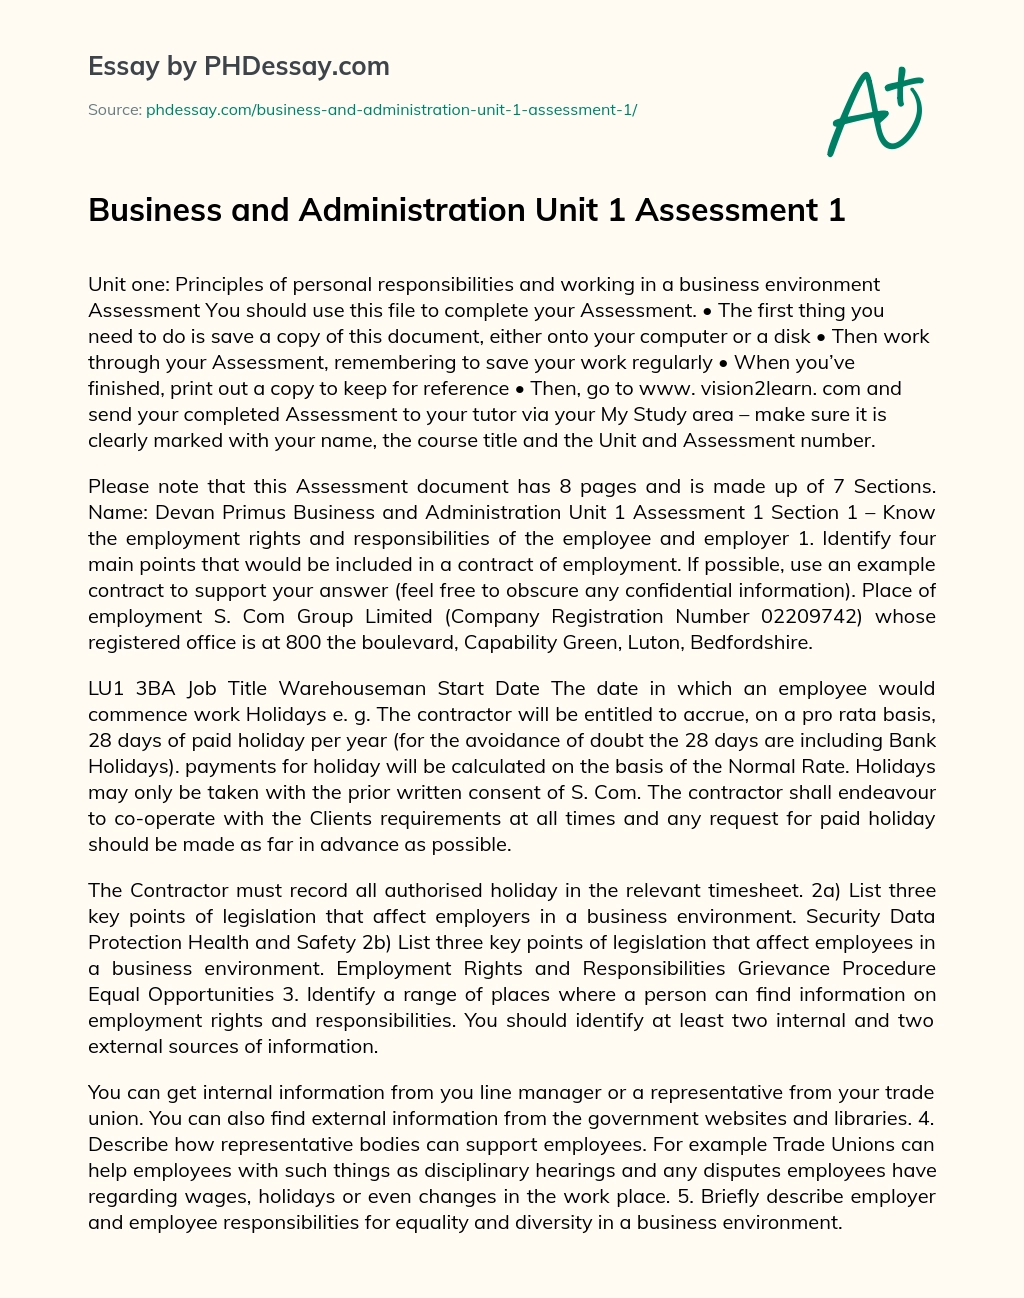 Business and Administration Unit 1 Assessment 1 essay